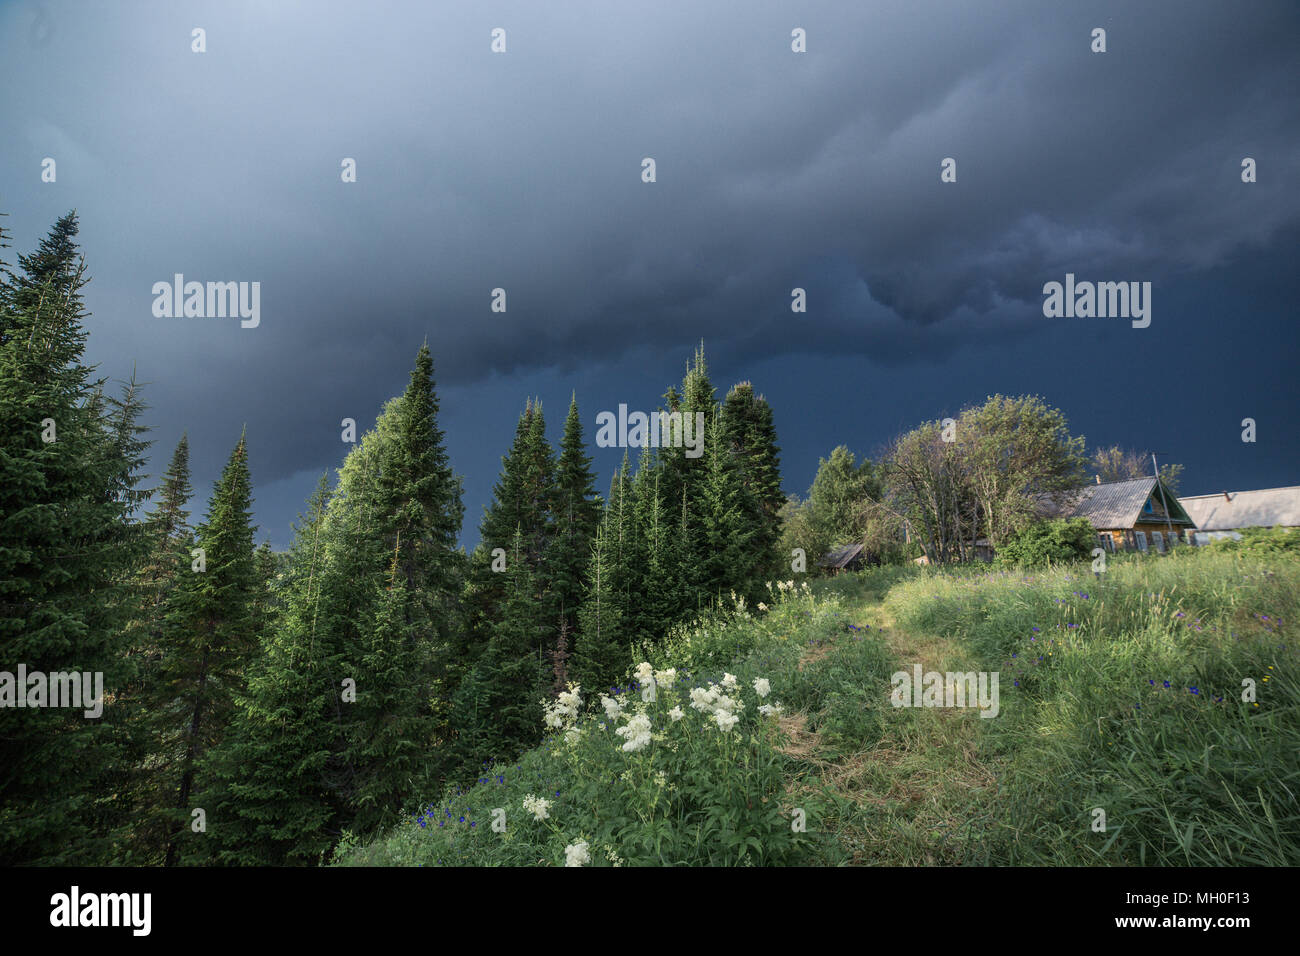 Atmospheric village landscape with pine forest, green meadow, cozy old houses and dark blue rain clouds before heavy rain. Stock Photo